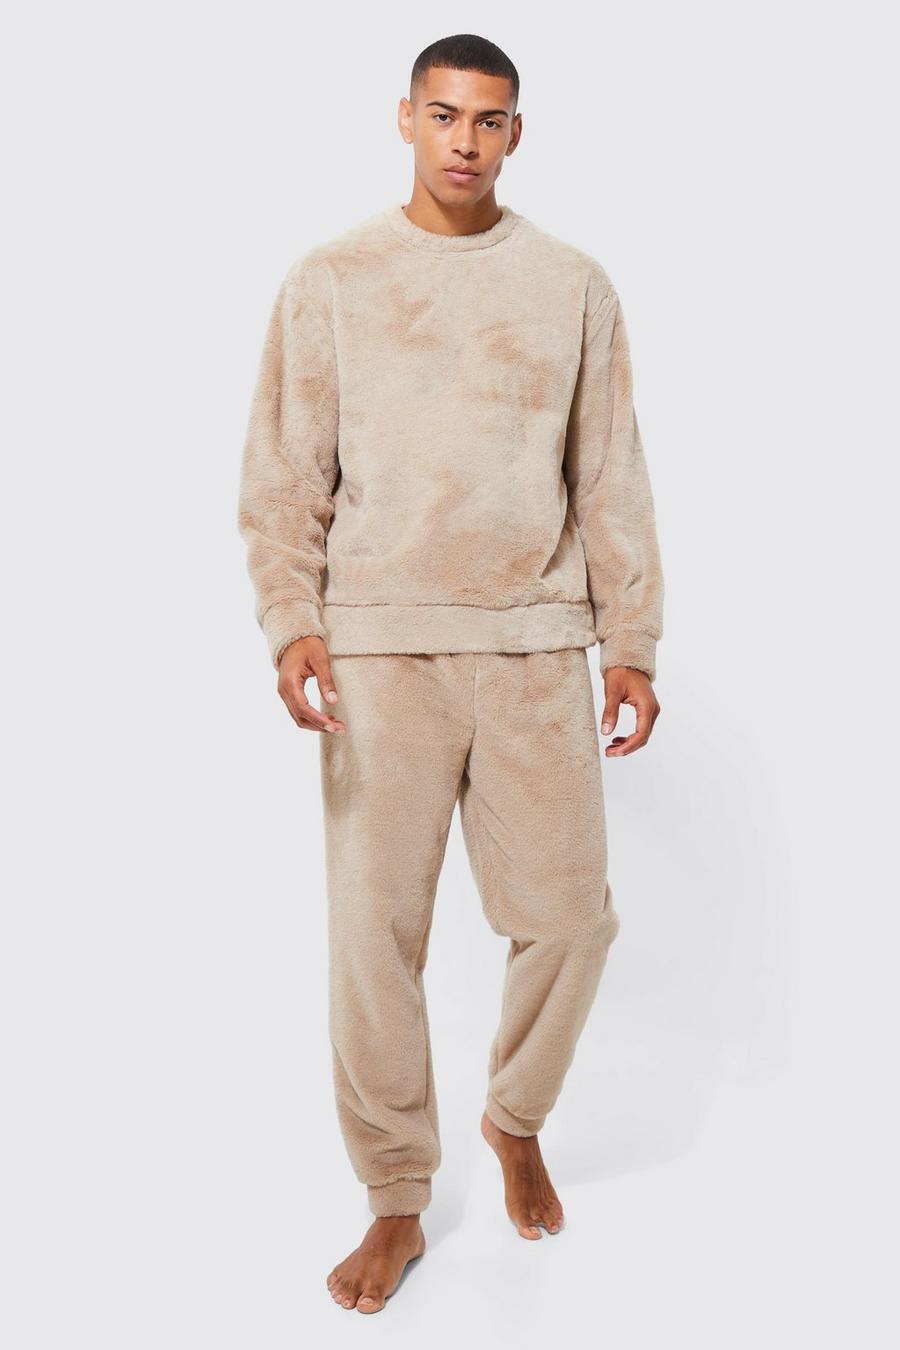 Nude Faux Fur Oversized Sweater and Cuffed Jogger Lounge Set